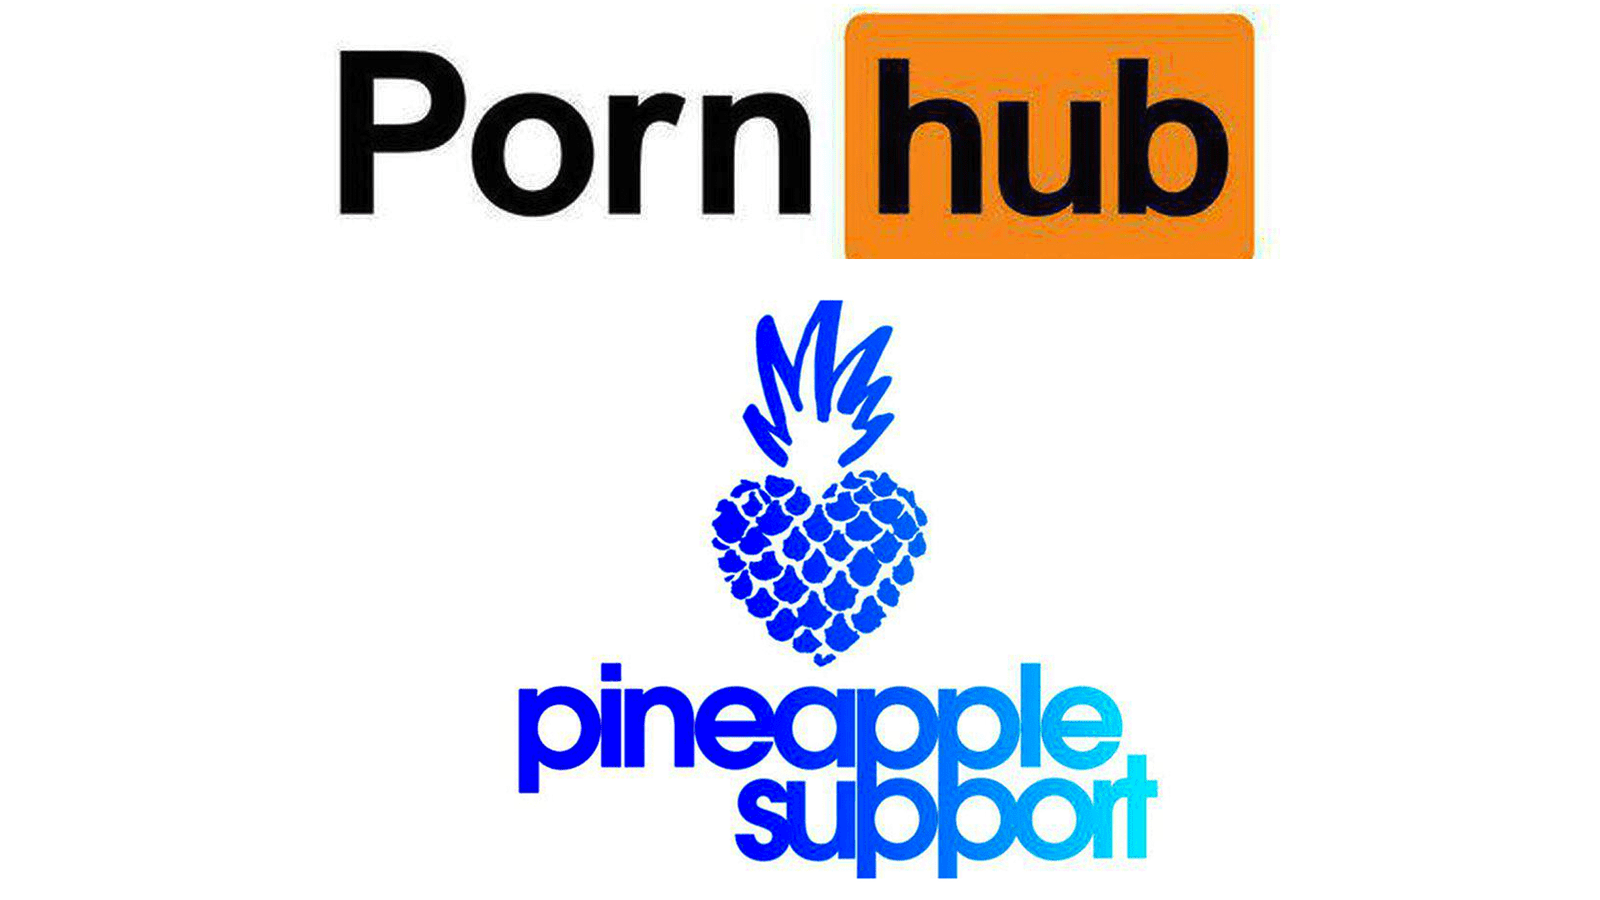 Pineapple Support, Pornhub Launch Contest To Promote Self-Care